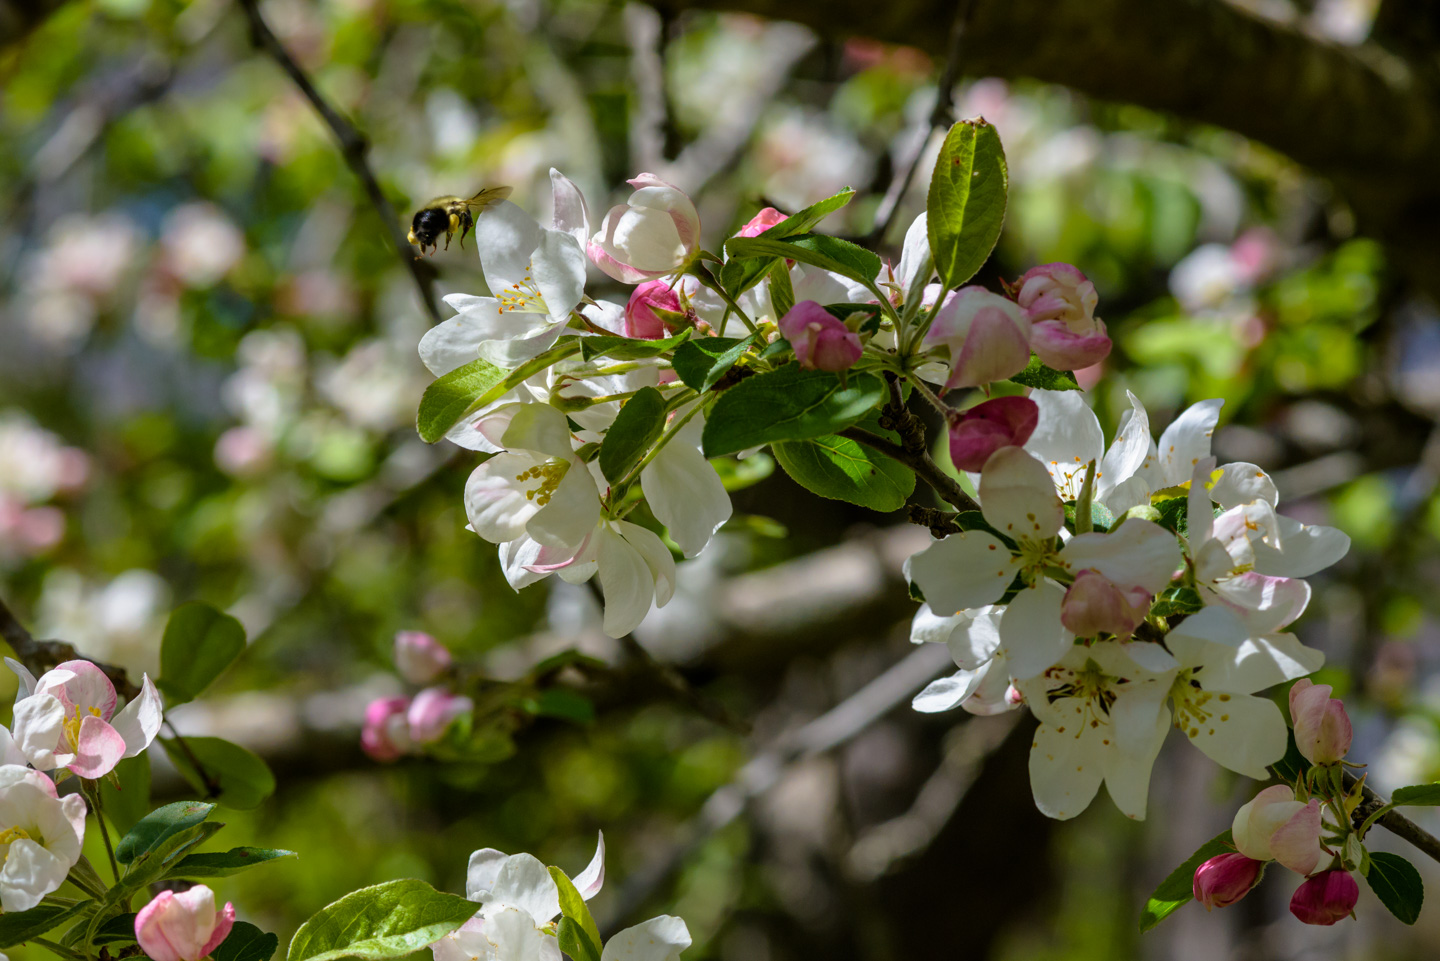 A bee approaches an apple blossom